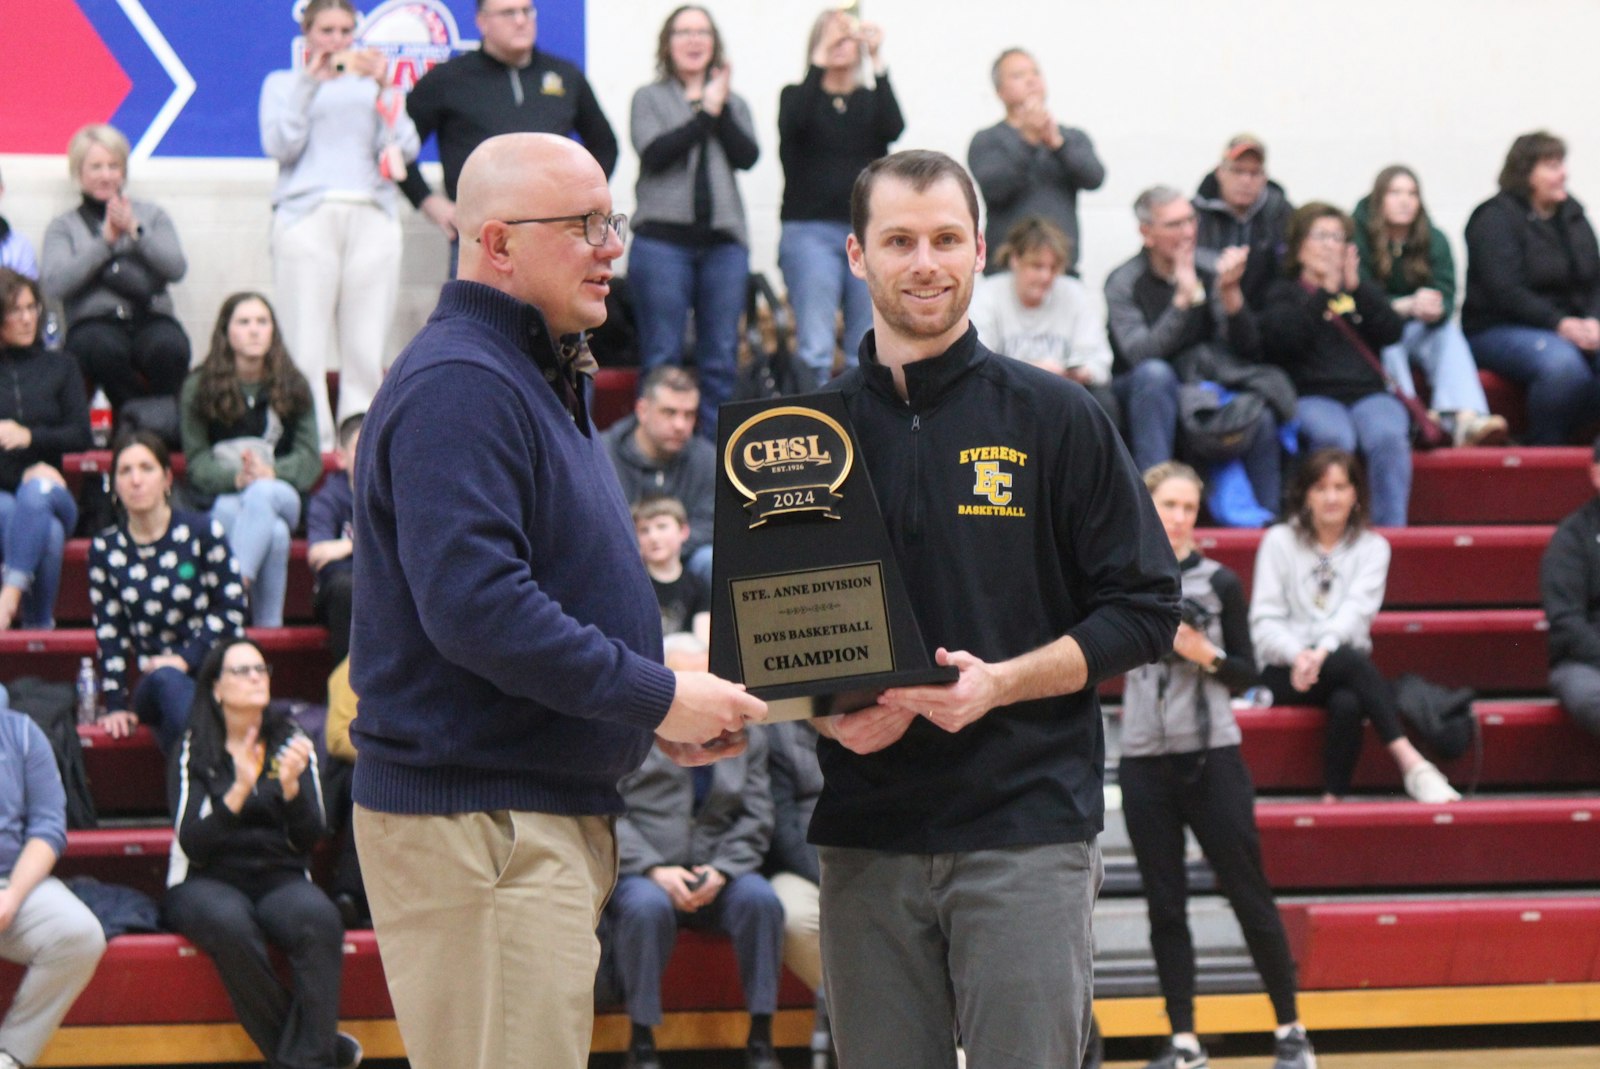 Catholic High School League associate director Mike Evoy presents the St. Anne’s Division championship trophy to Everest head coach Rich Cross. The Mountaineers defeated Waterford Our Lady of the Lakes, 49-29.